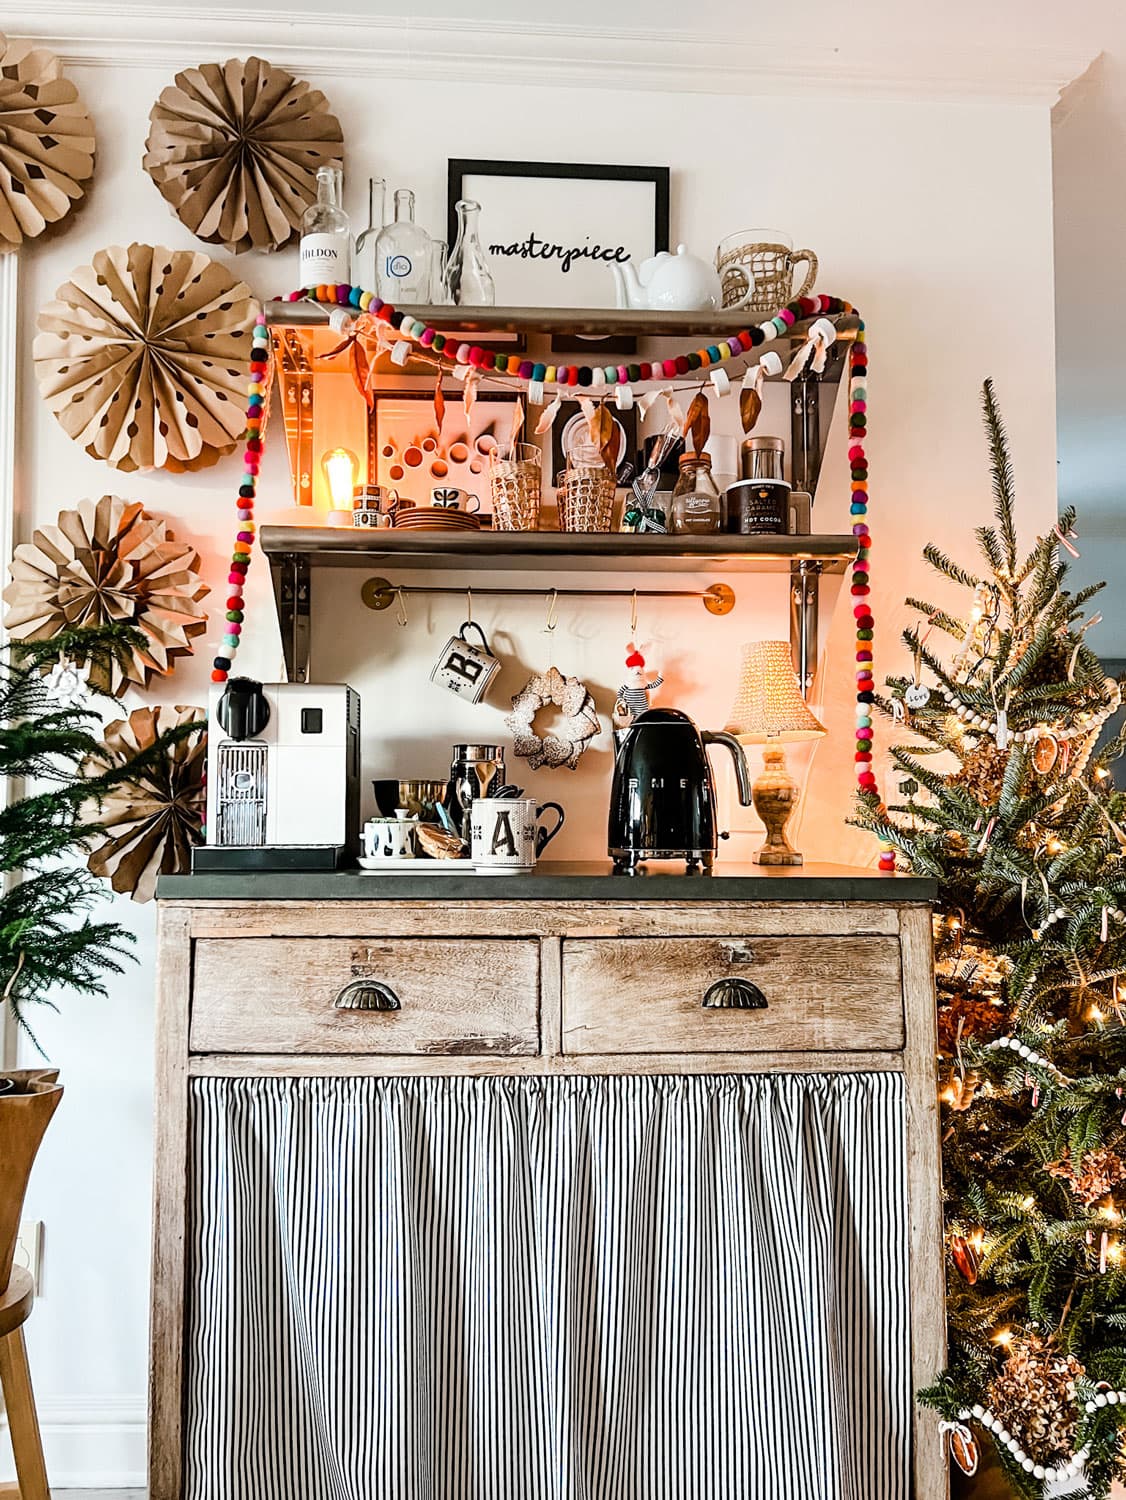 https://mostlovelythings.com/wp-content/uploads/2022/12/coffee-bar-christmas-decorations.jpg